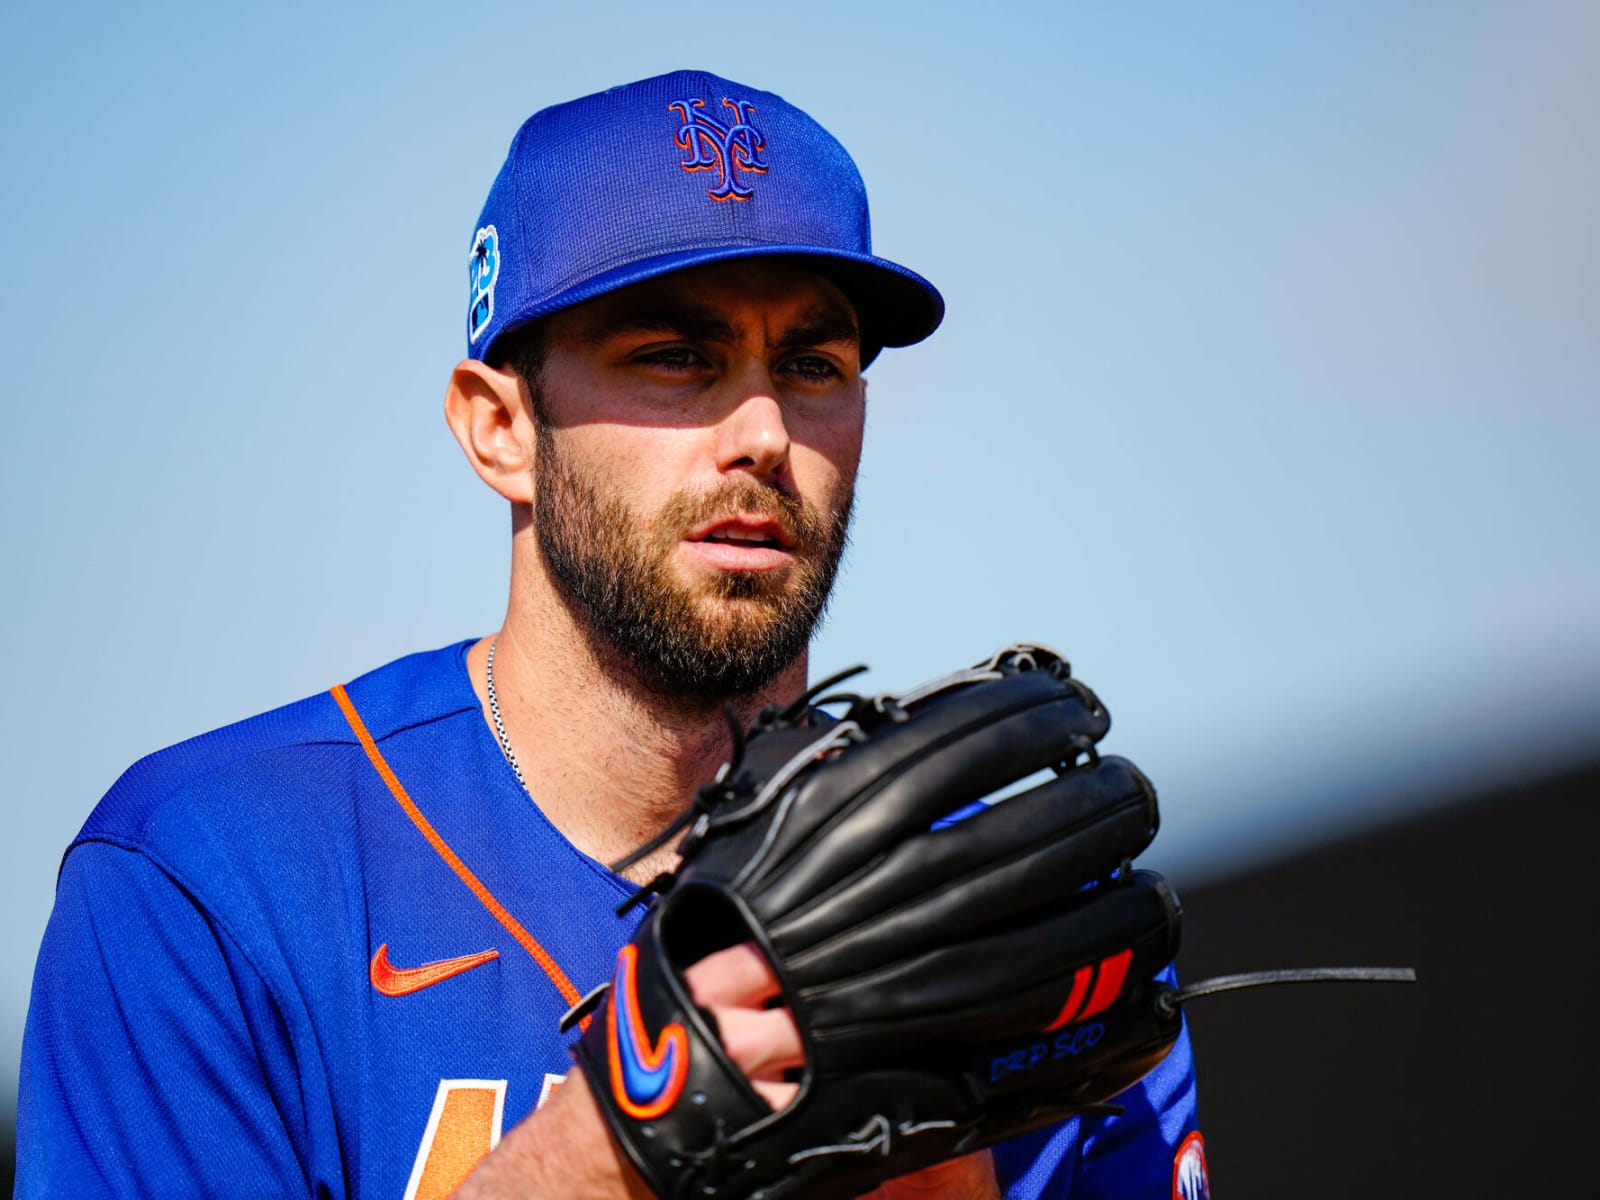 David Peterson to remain in Mets' starting rotation after strong